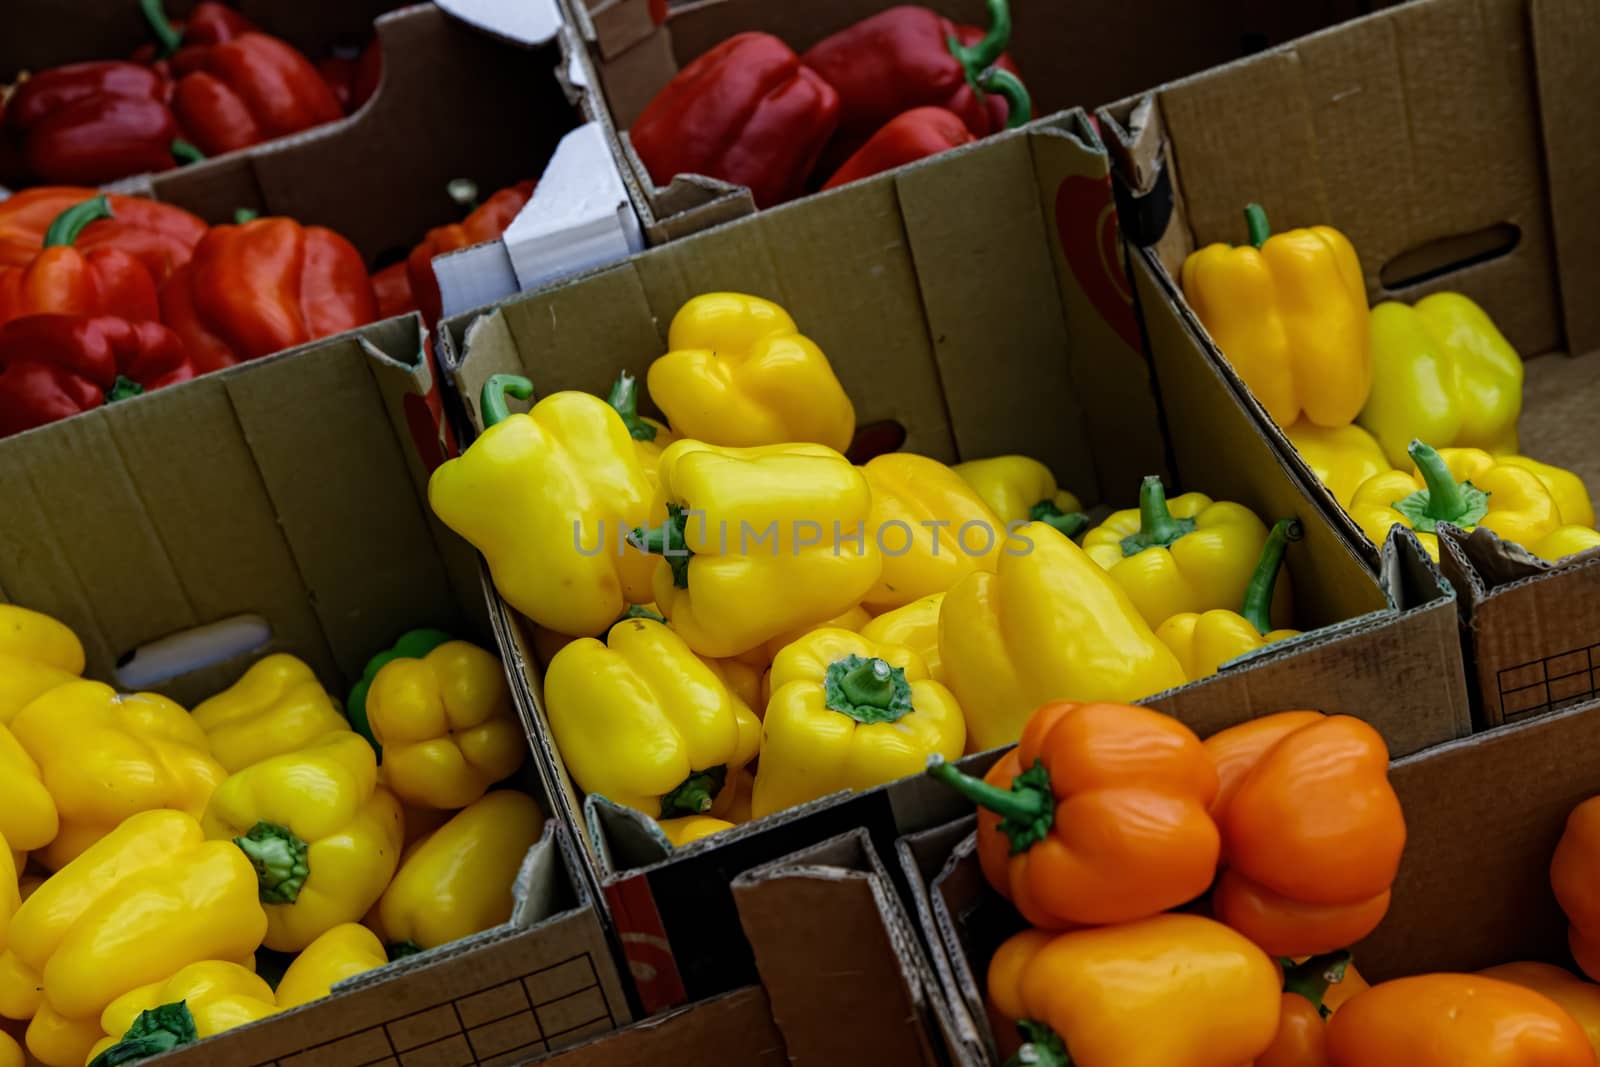 Yellow, red, orange bell pepper in boxes is put up for sale in the grocery store. Healthy, full of vitamins, food for vegetarians